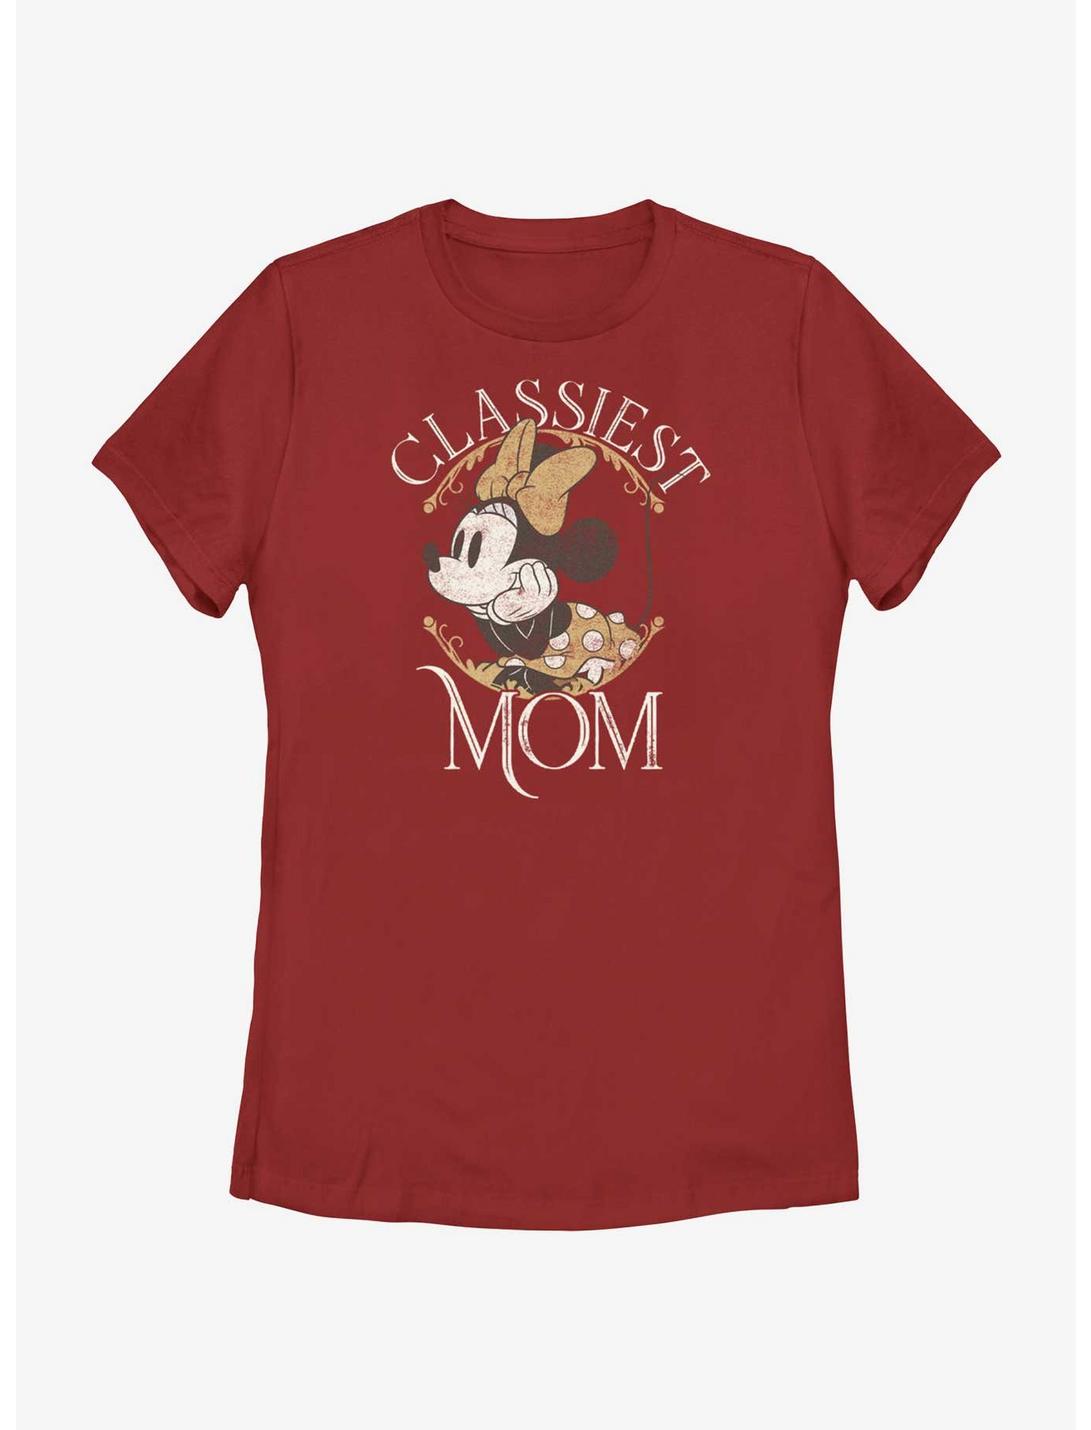 Disney Minnie Mouse Classiest Mom Womens T-Shirt, RED, hi-res